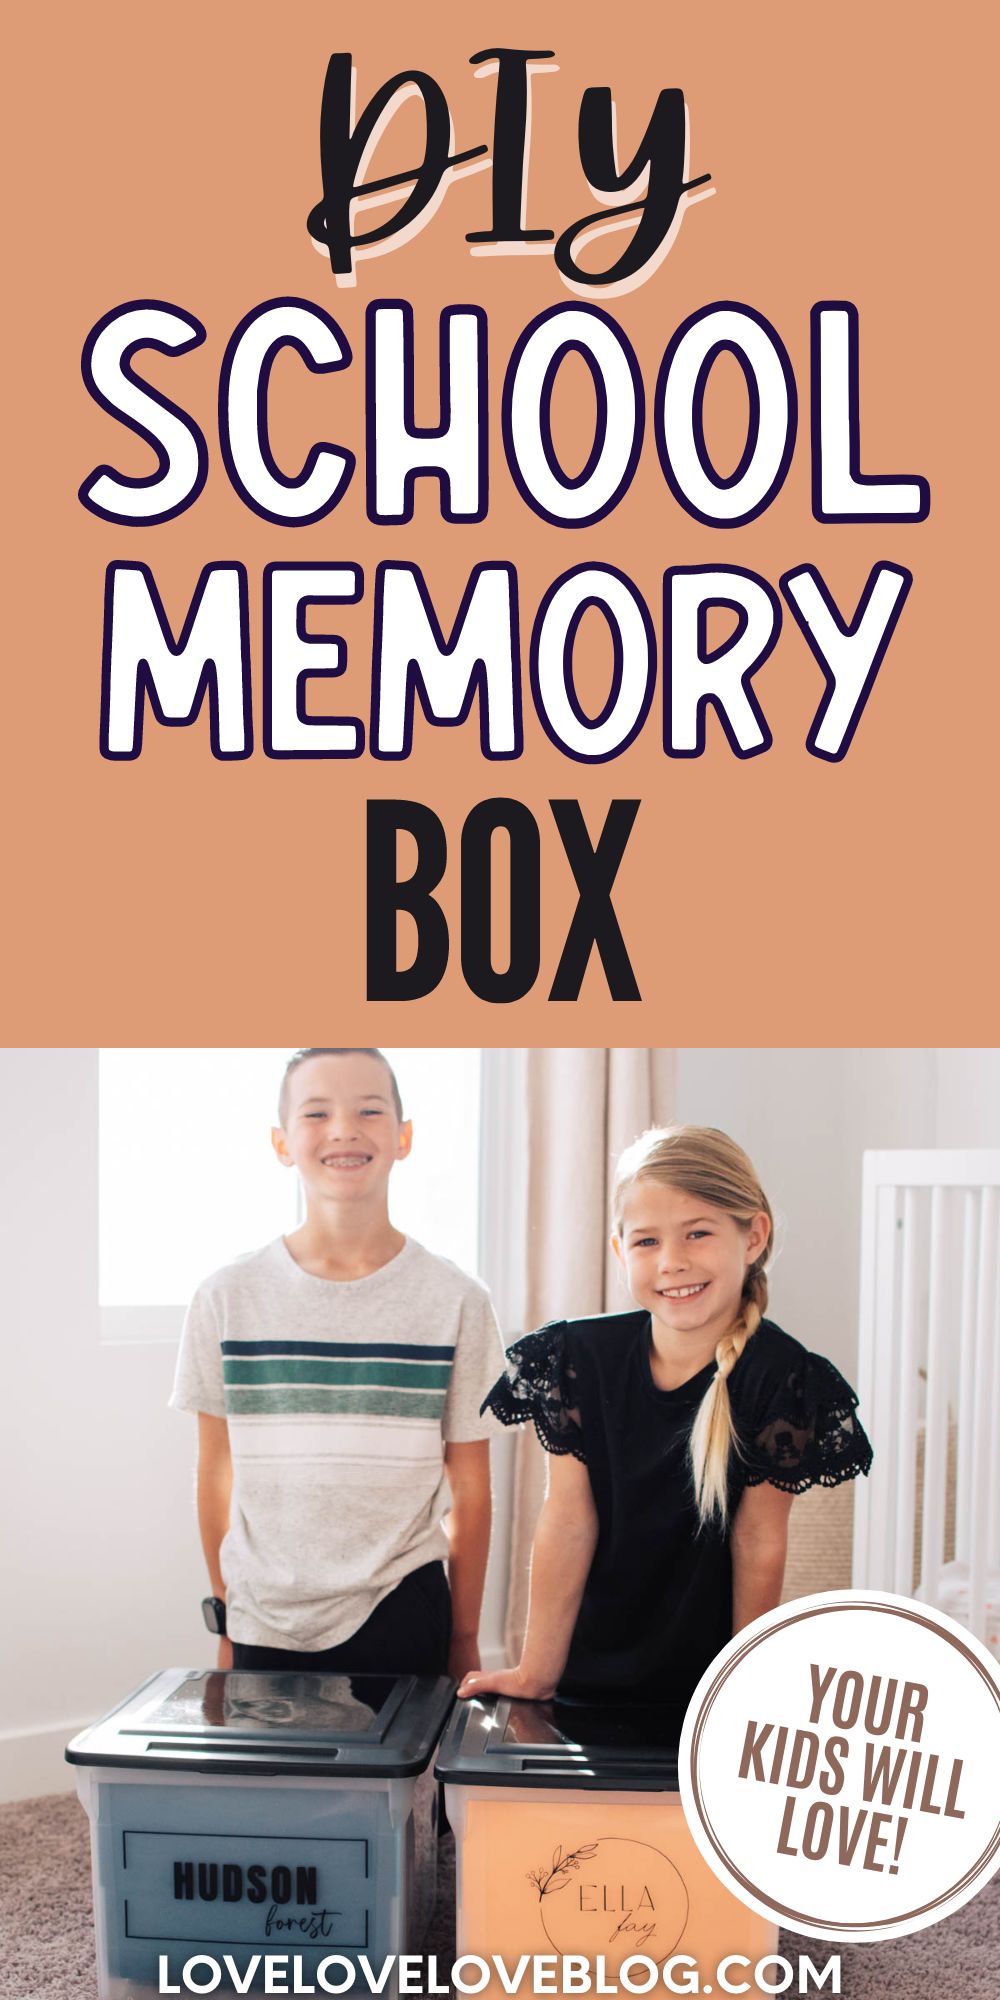 Pinterest graphic with text overlay and photo of two children behind school memory boxes.